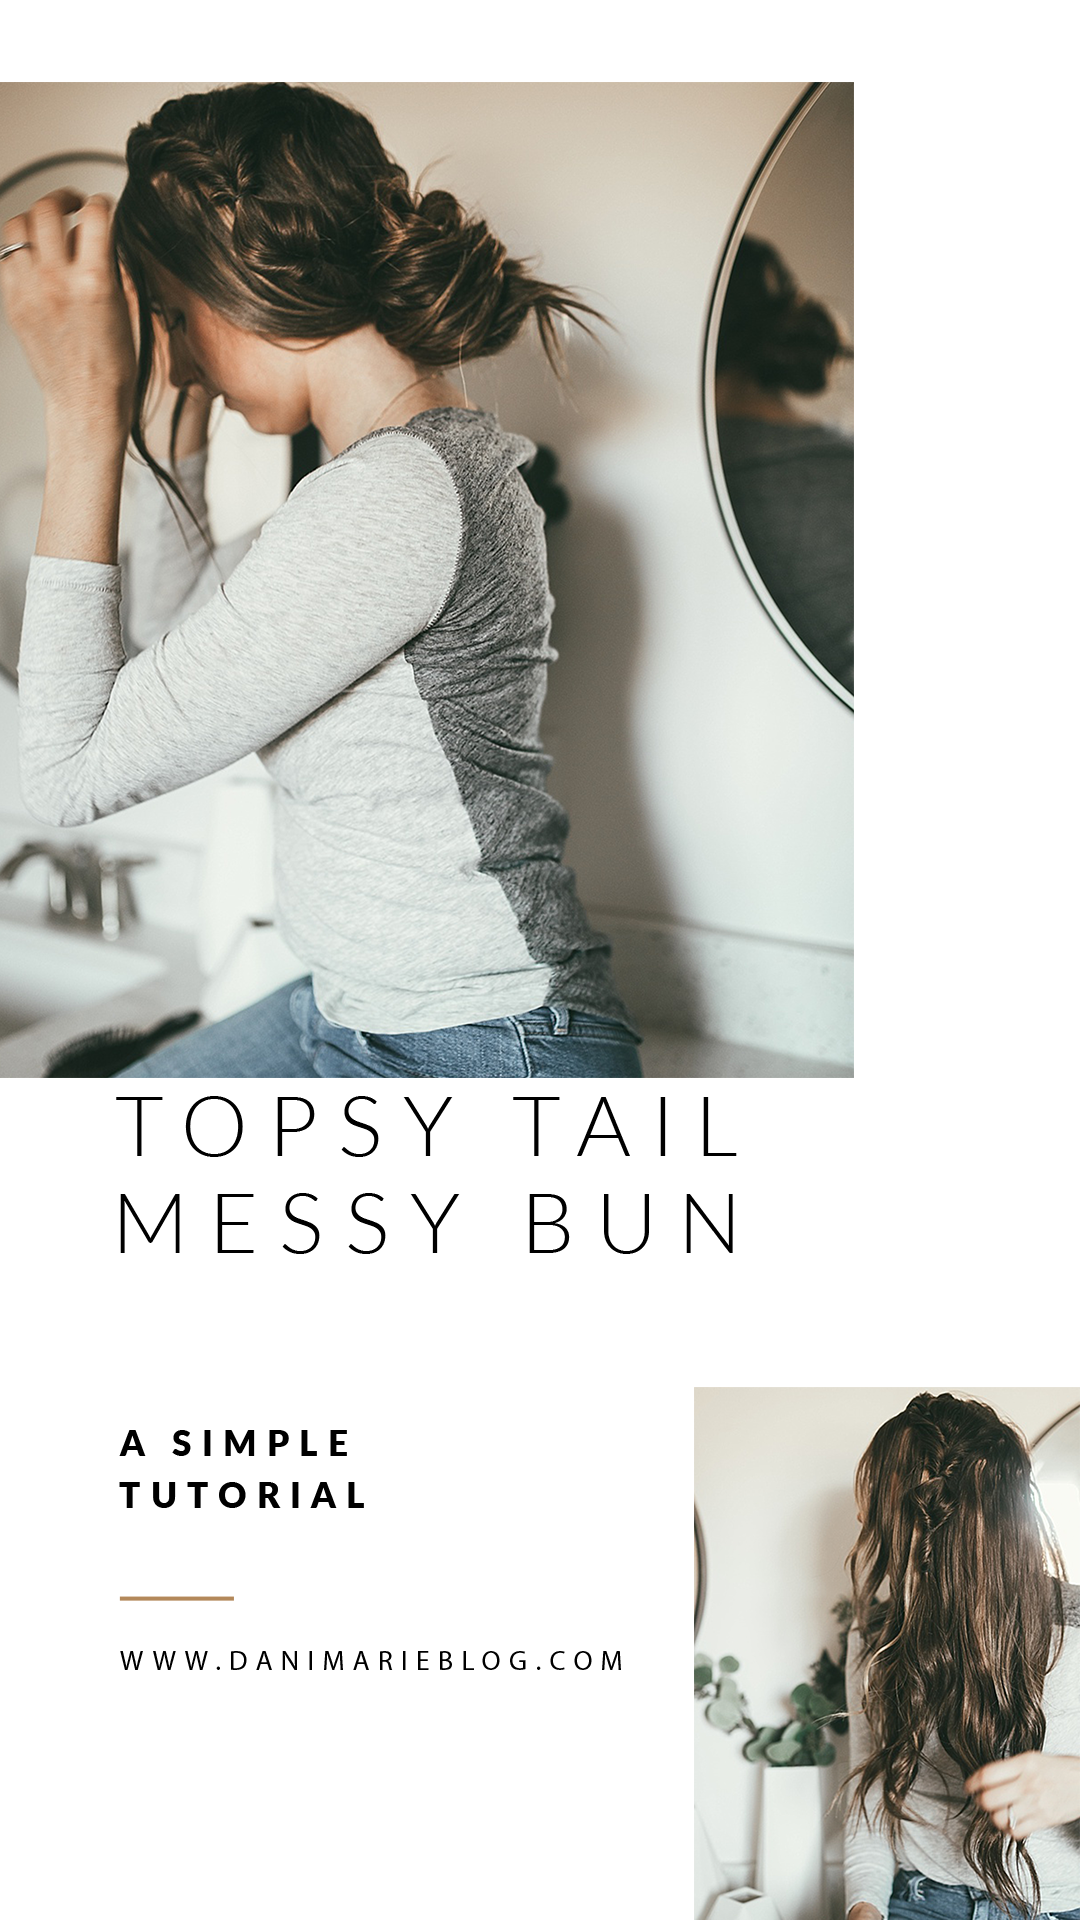 Looking for the best EASY yet stylish hair tutorial? Utah Style Blogger Dani Marie is sharing the perfect topsy tail bun tutorial that everyone will love. See it HERE!